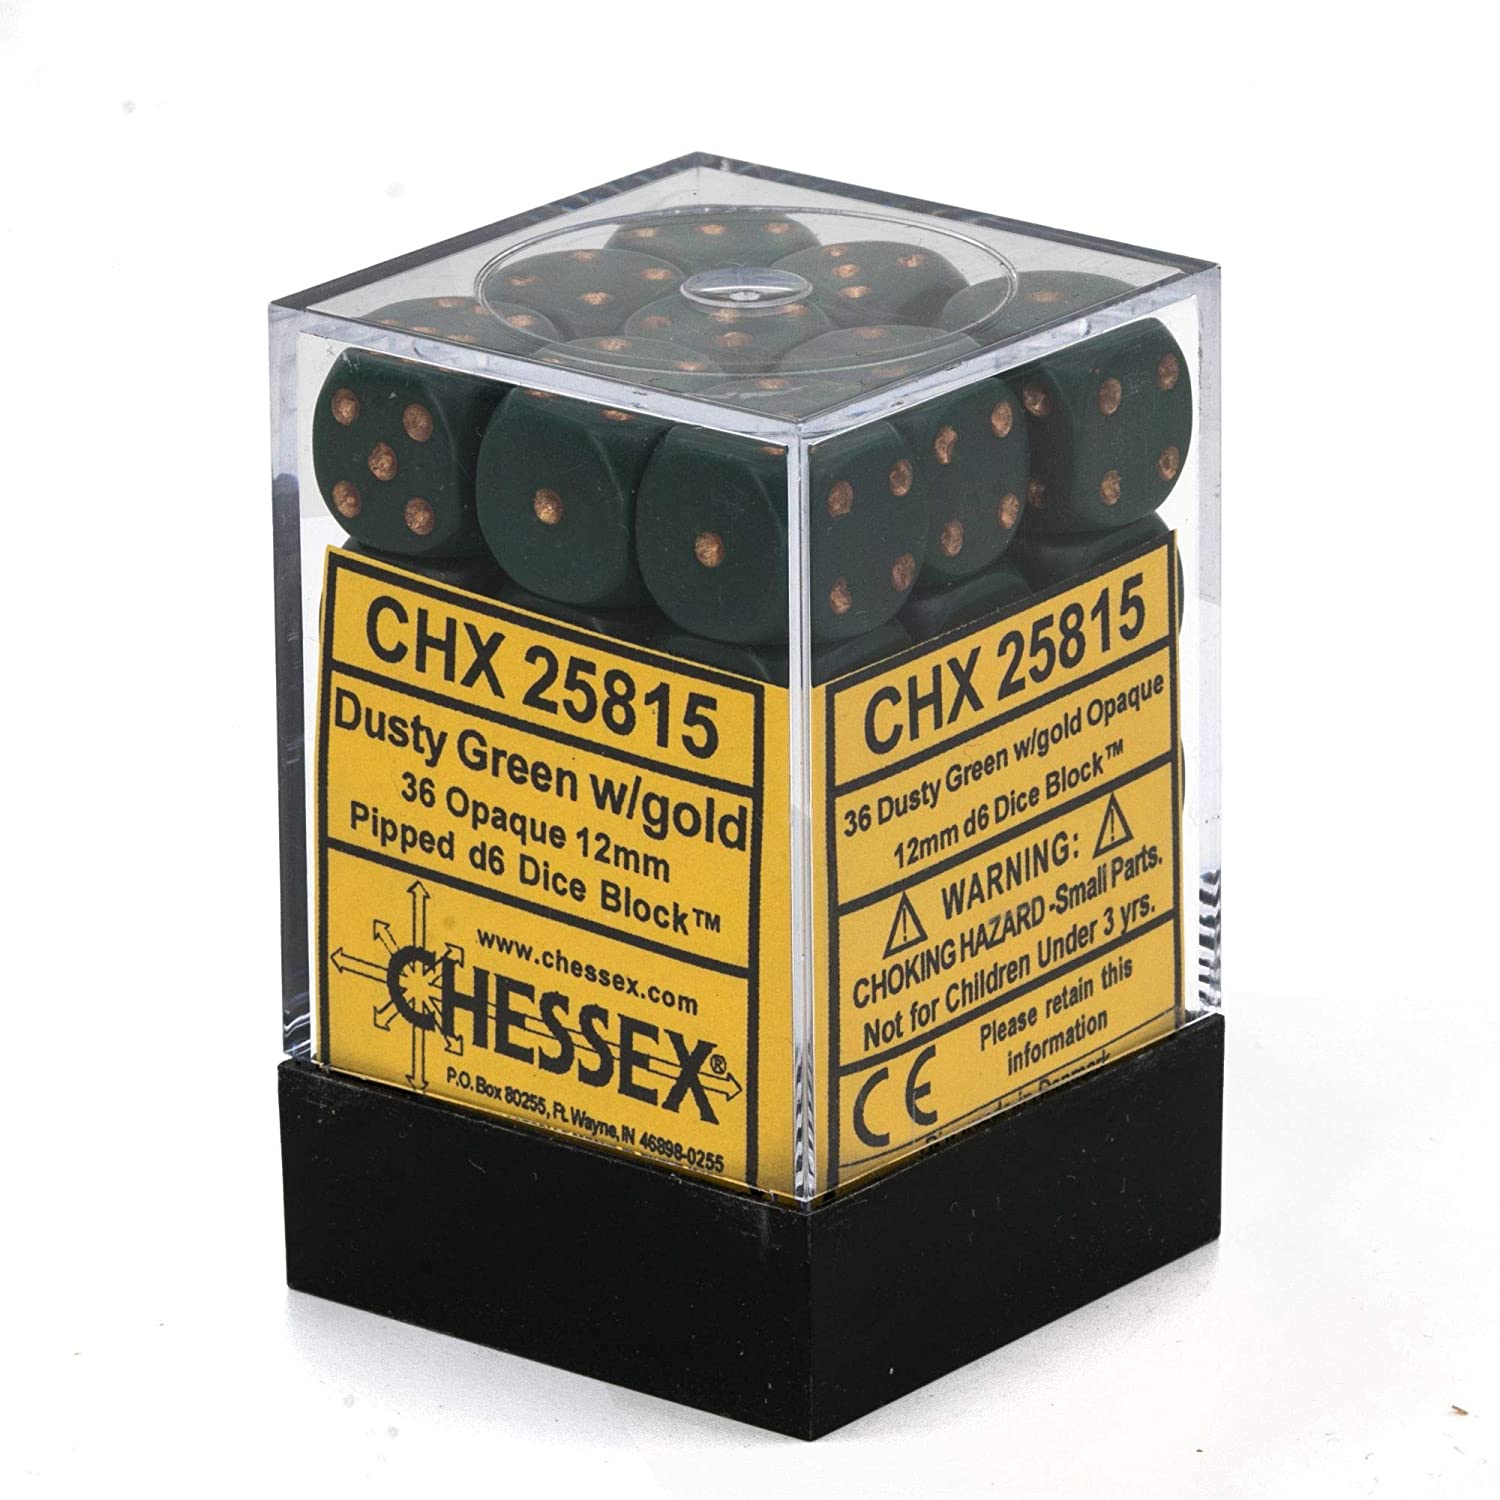 Chessex Dice: D6 Block 12mm - Opaque - Dusty Green with Copper (CHX 25815) - Gamescape